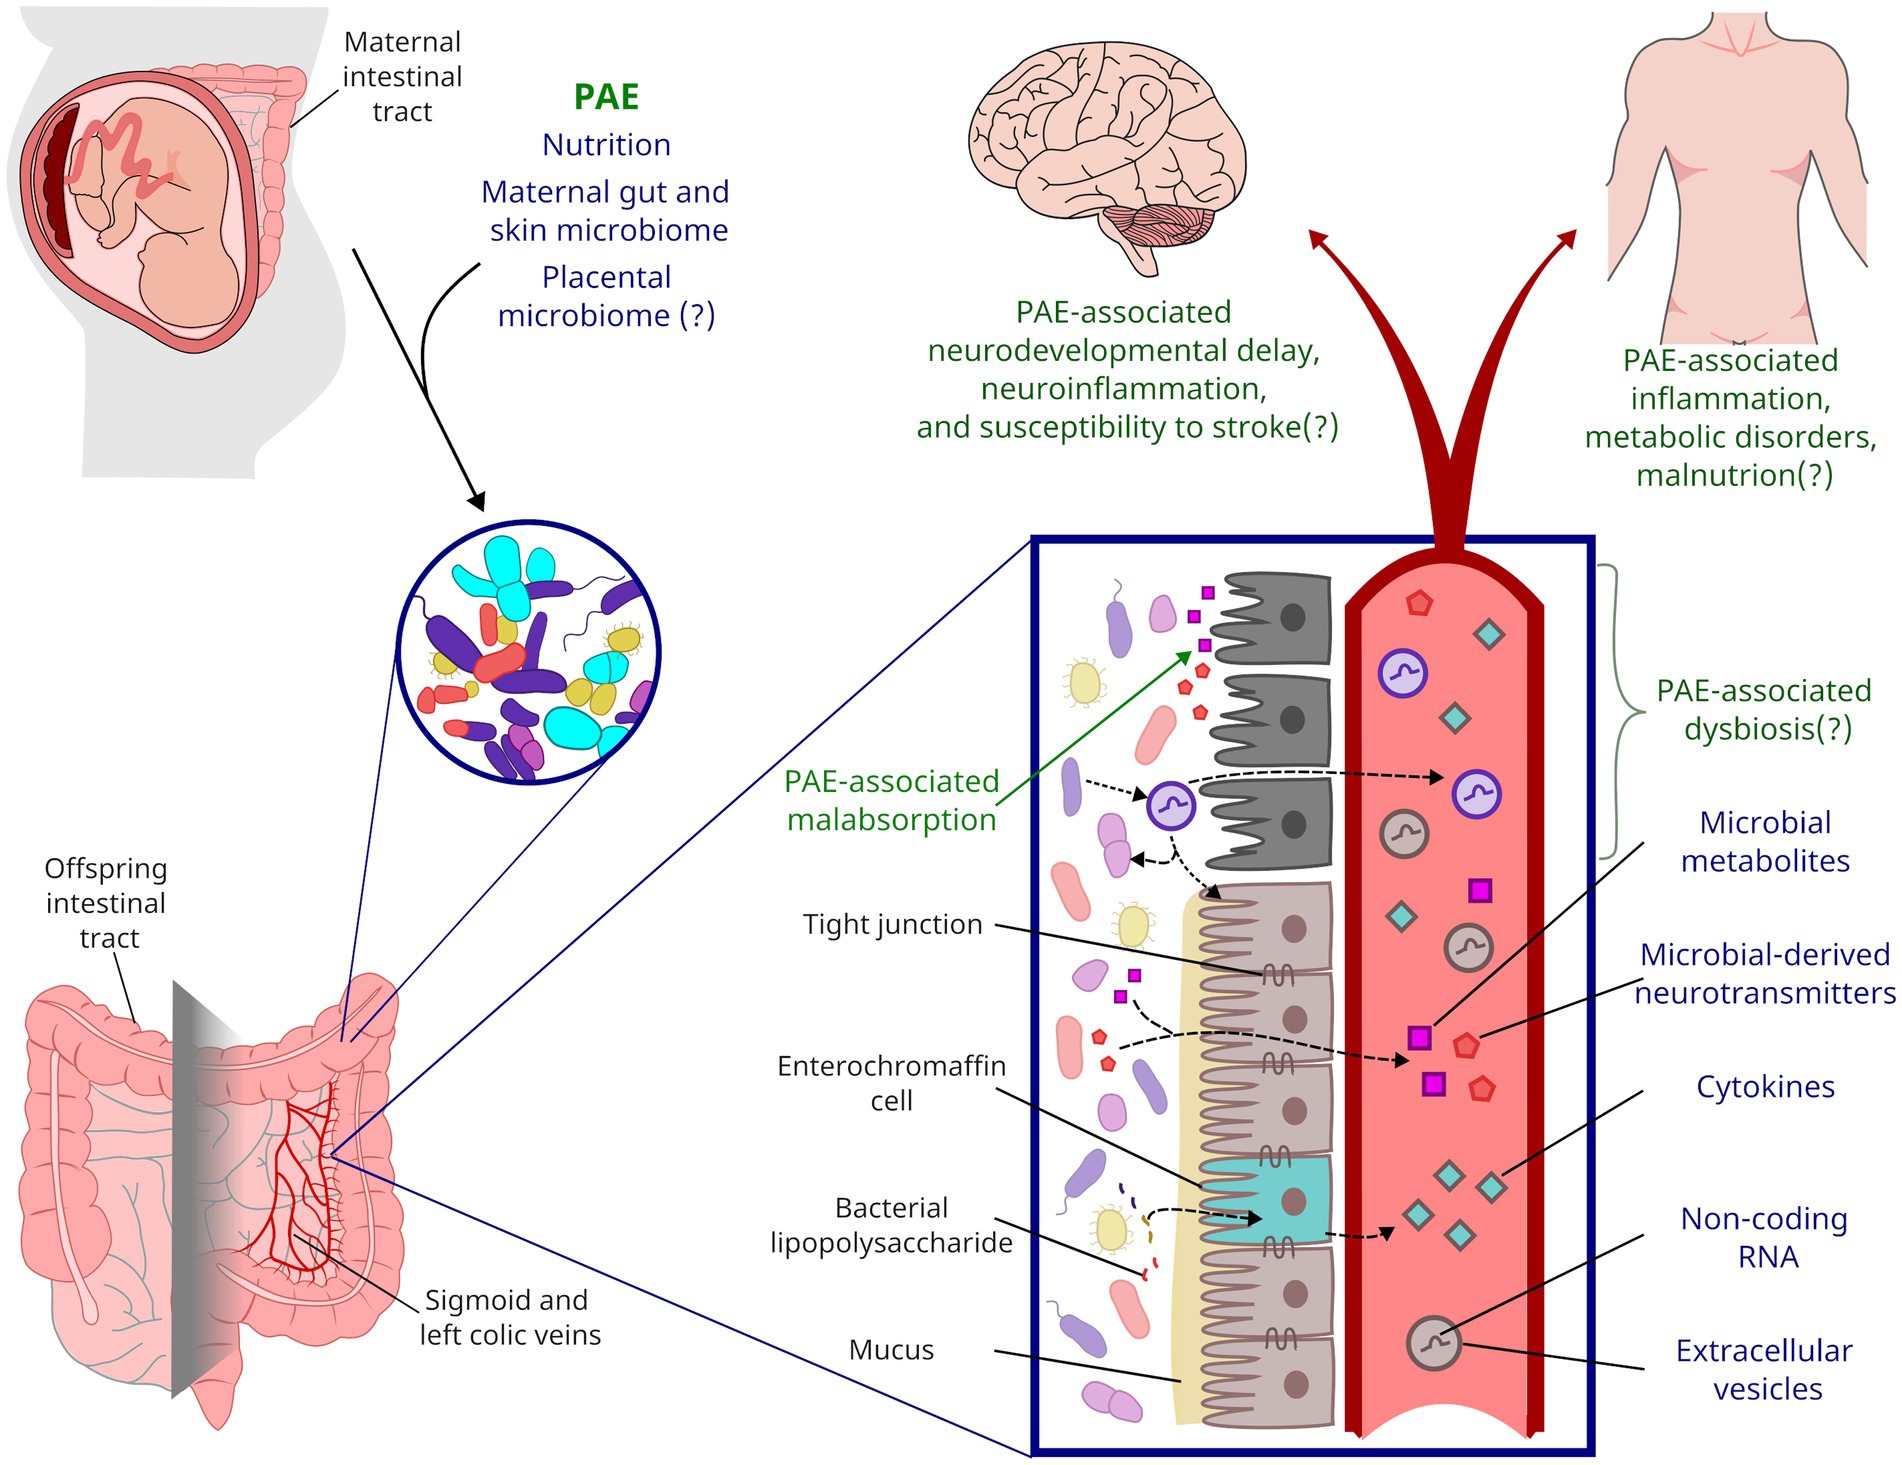 Frontiers Microbiota and nutrition as risk and resiliency factors following prenatal alcohol exposure pic